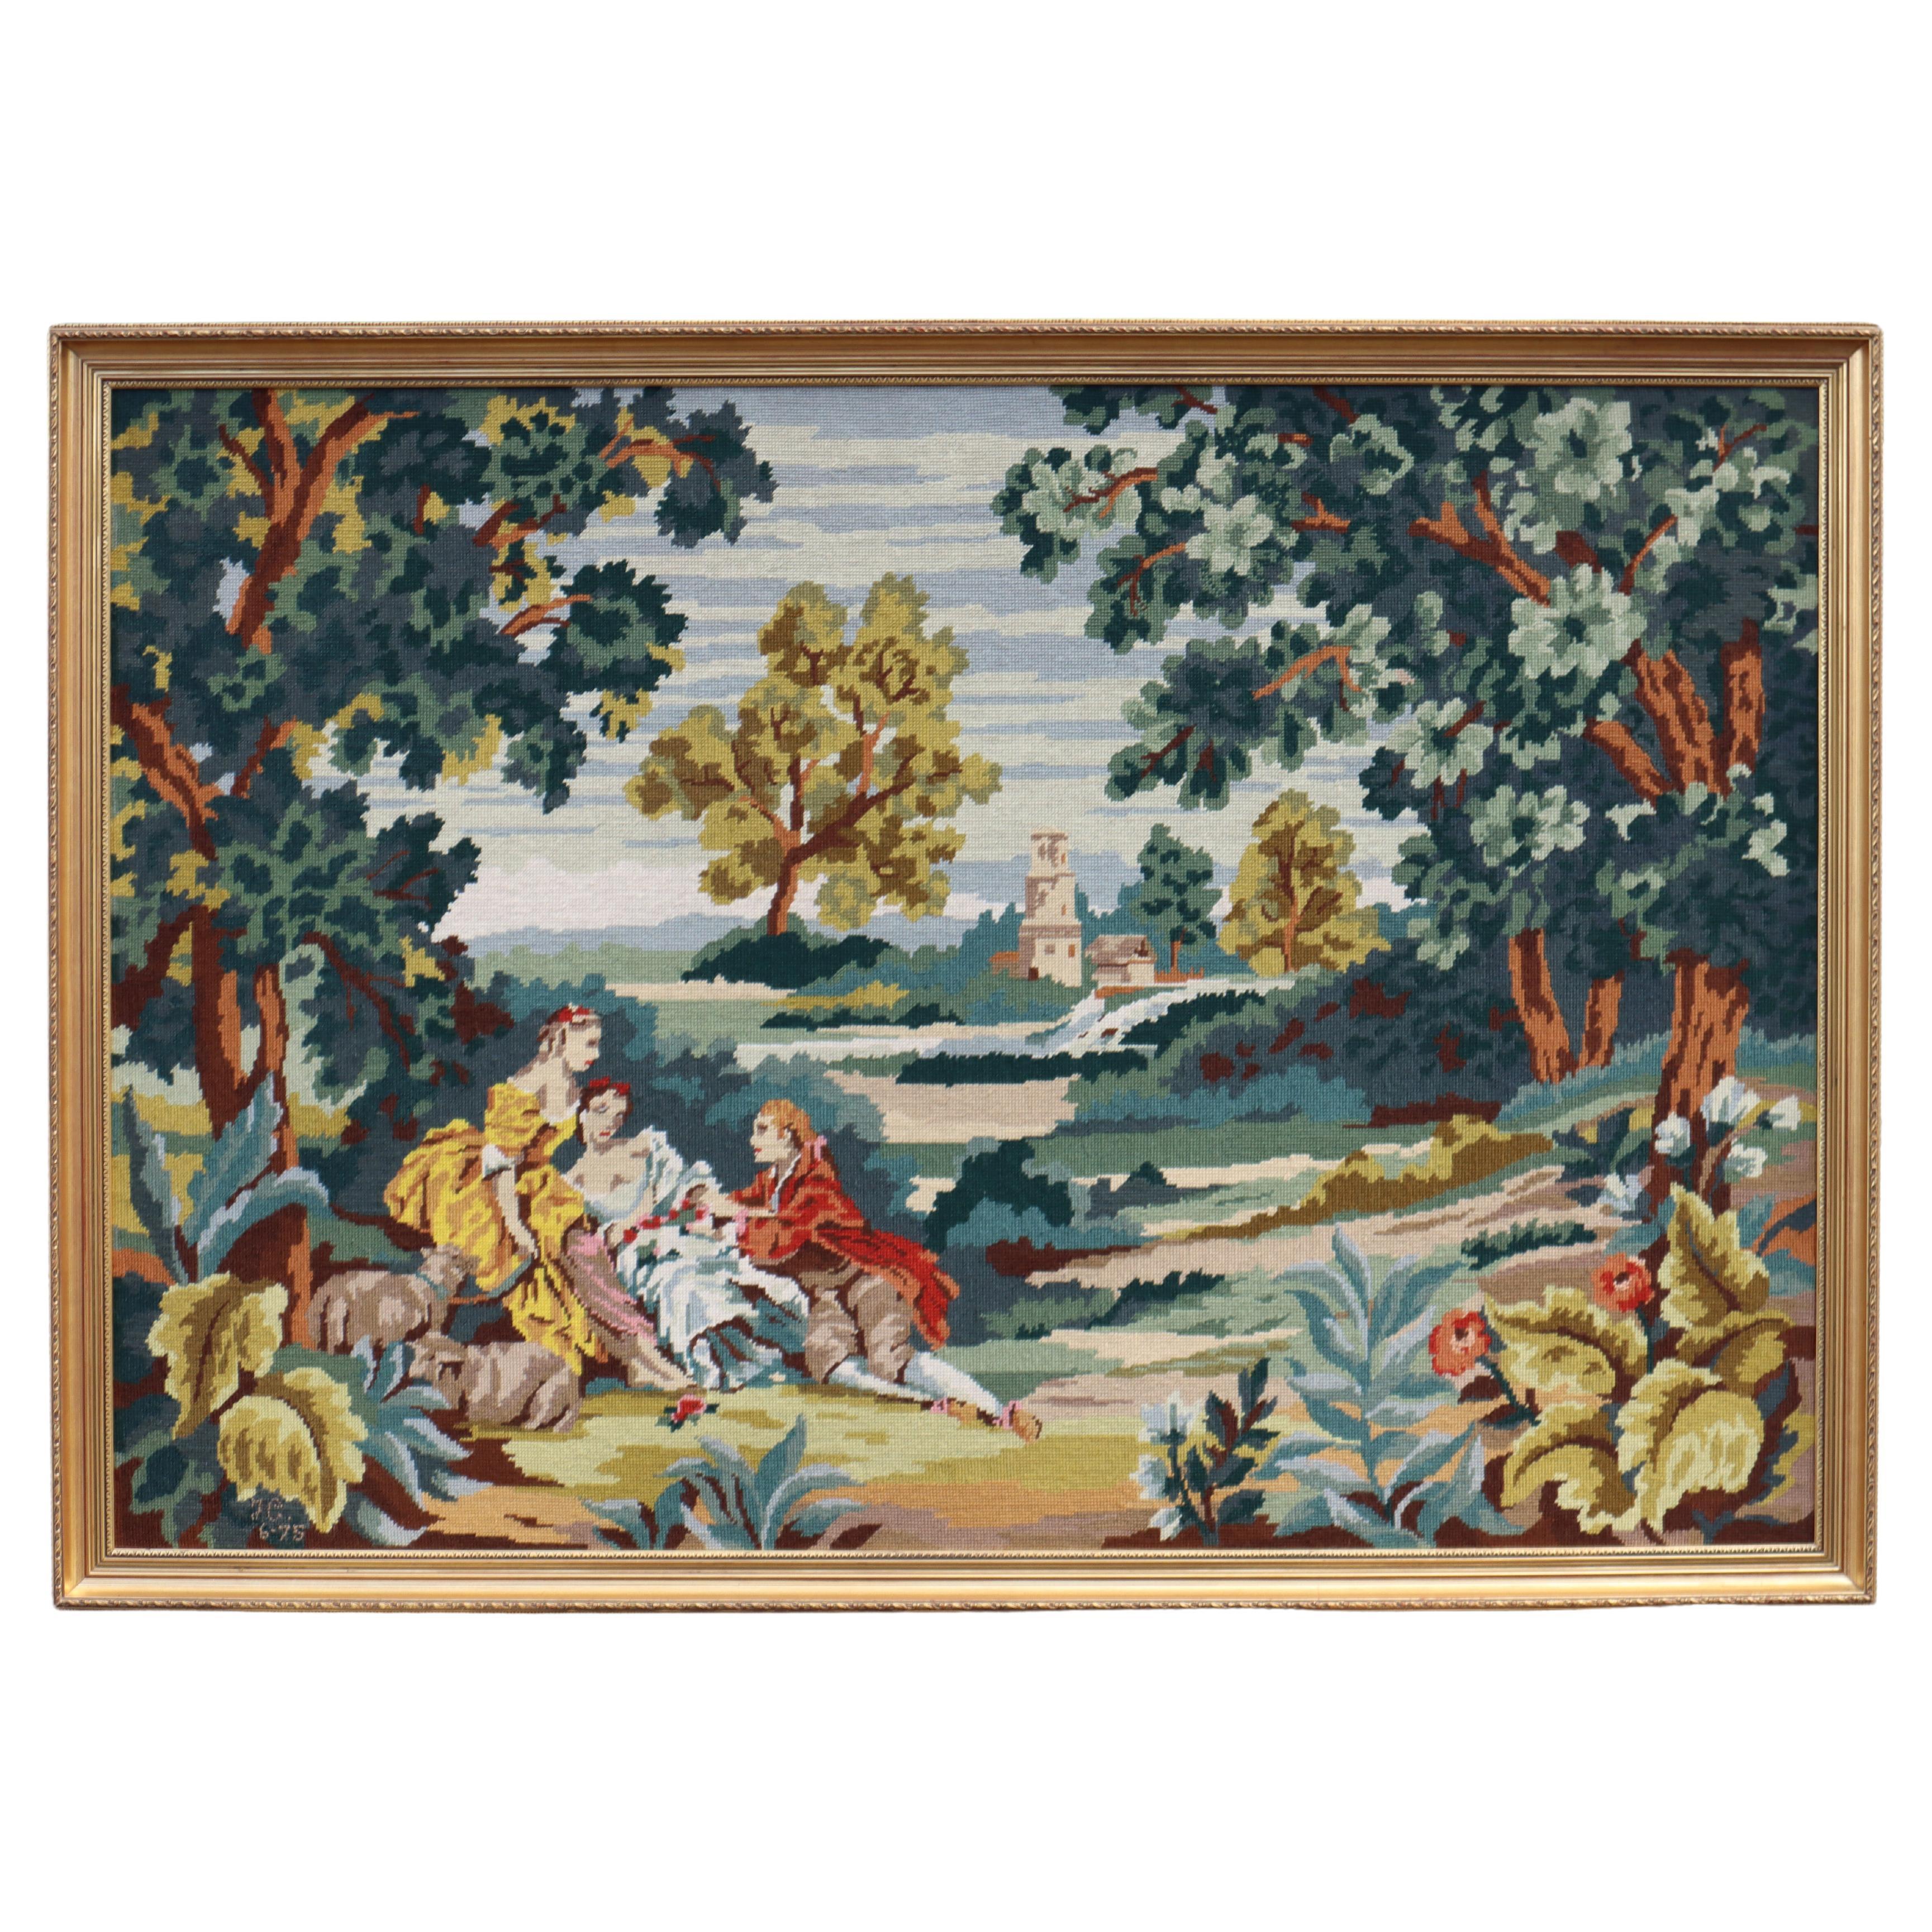 What is a tapestry used for?